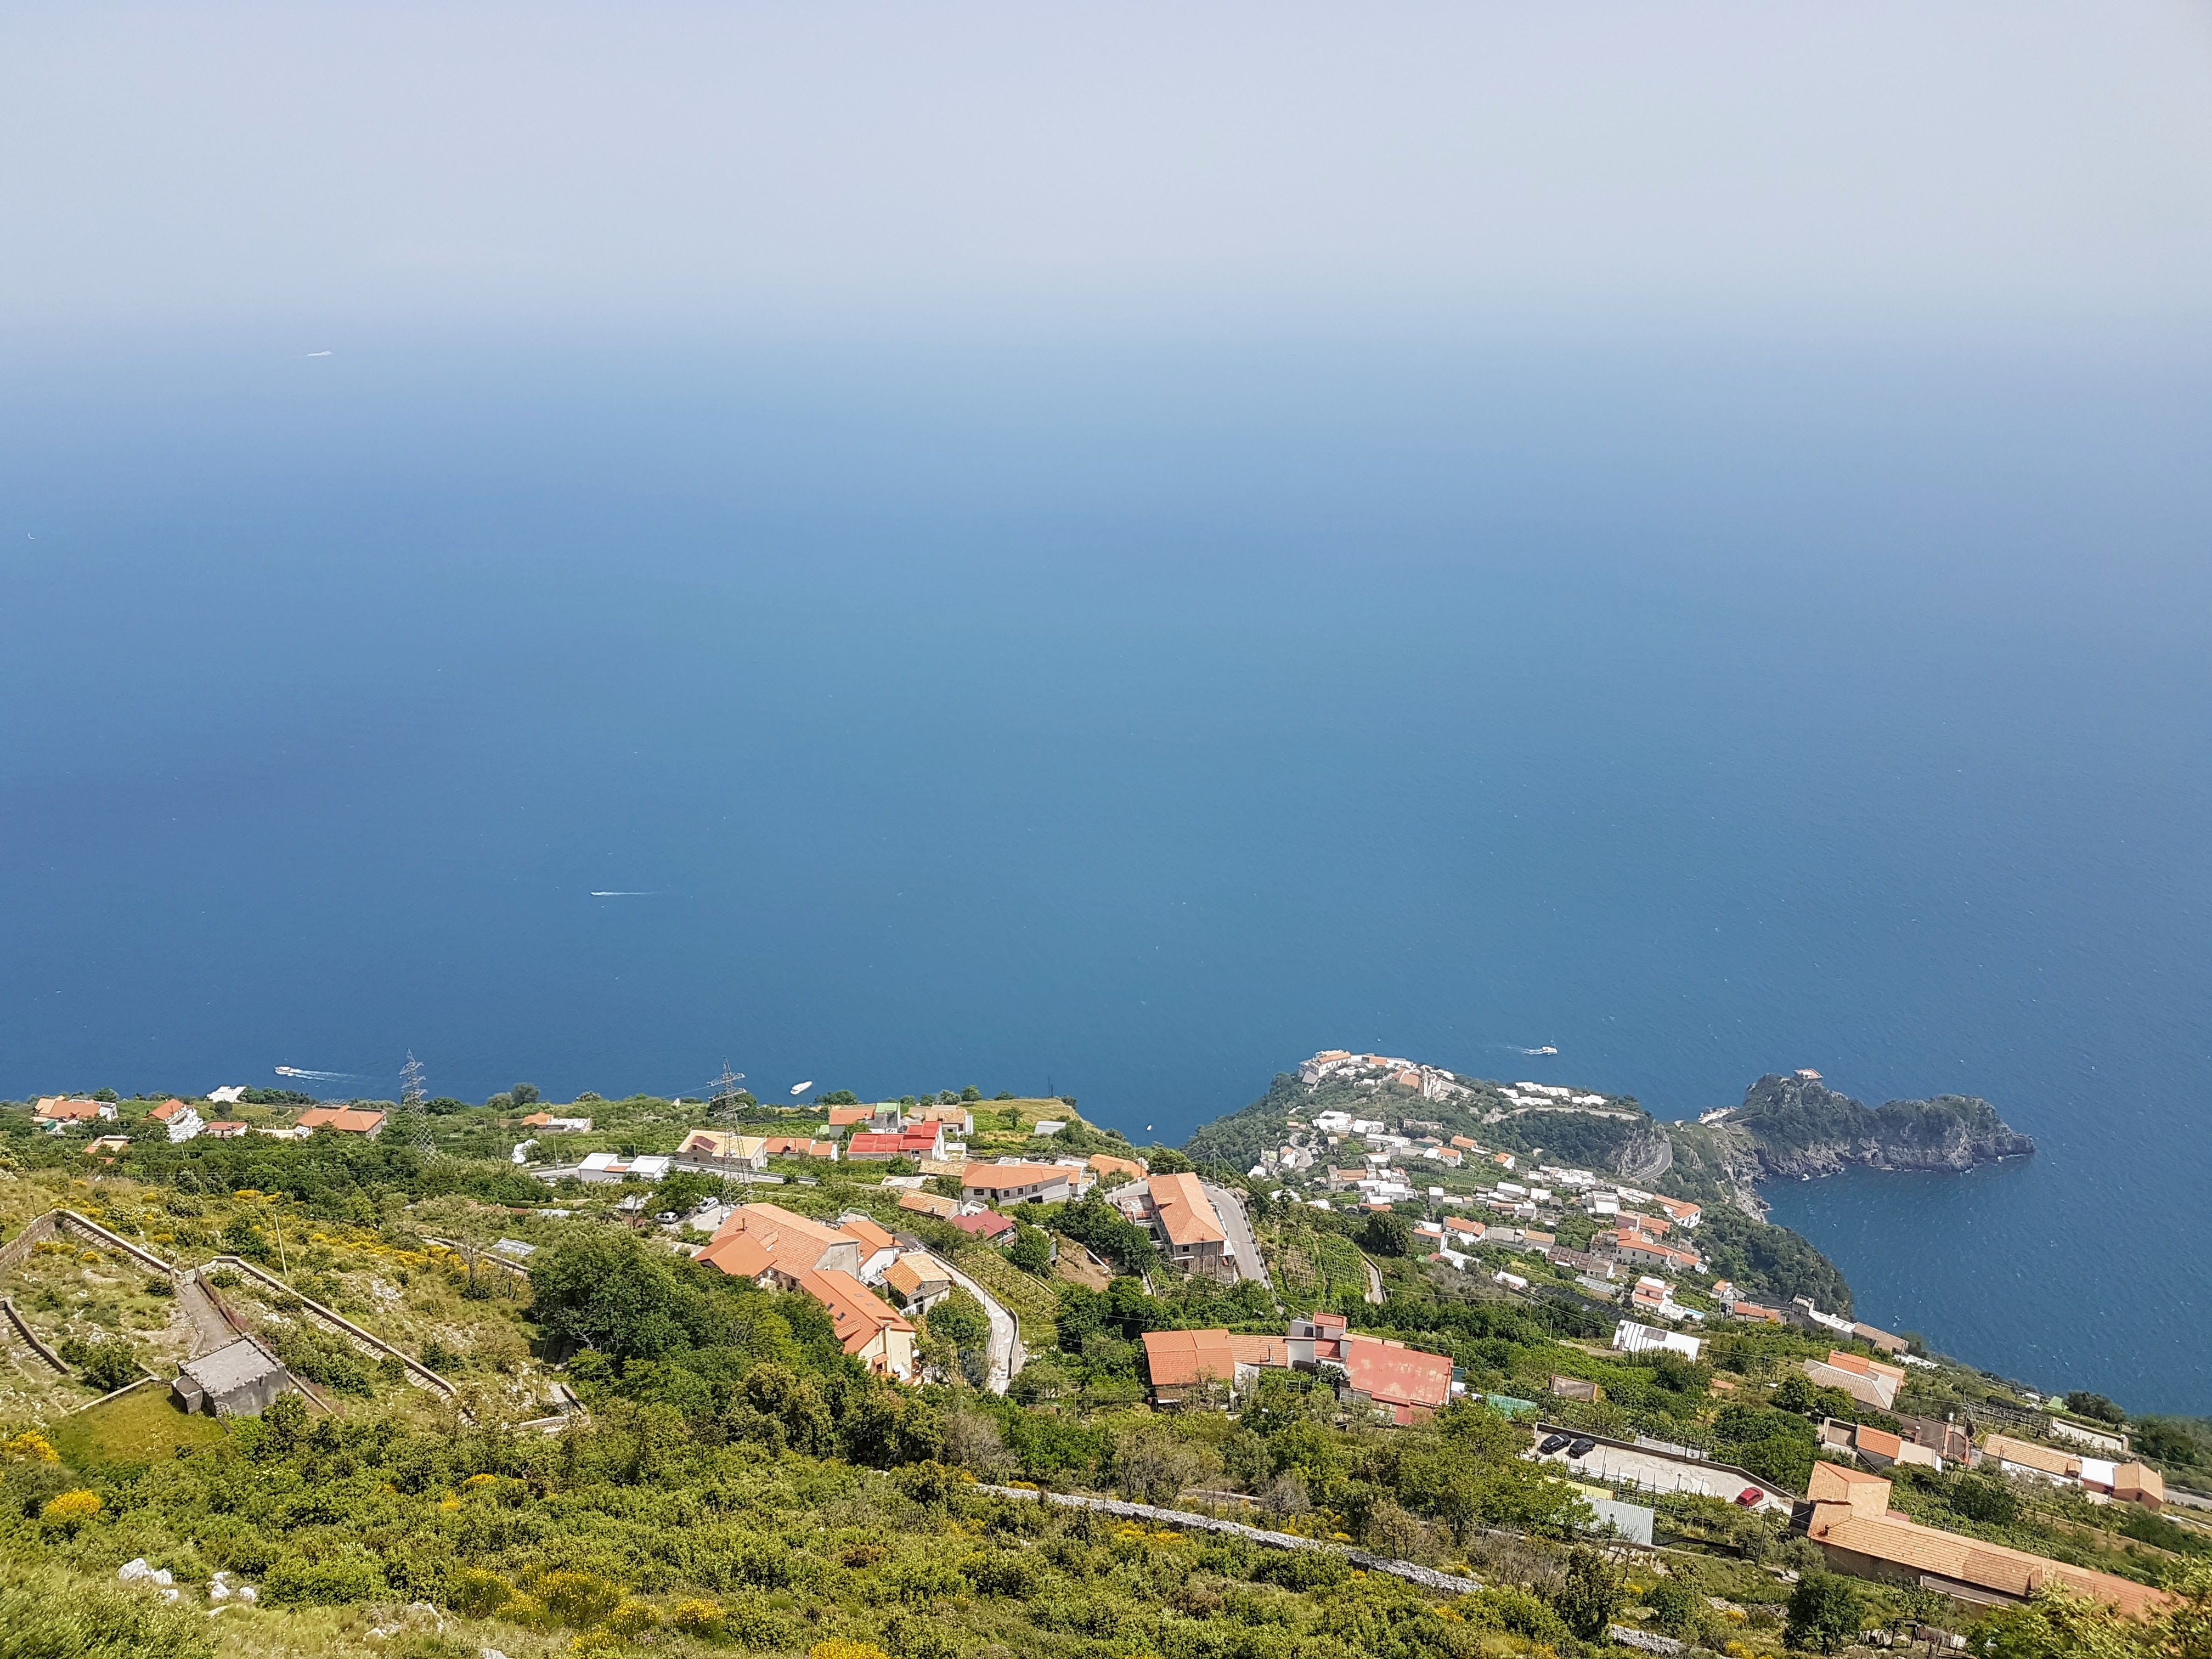 View of the Amalfi coast sea, above Amalfi, took from a high point in the city of Agerola - Local guide @LuigiZ